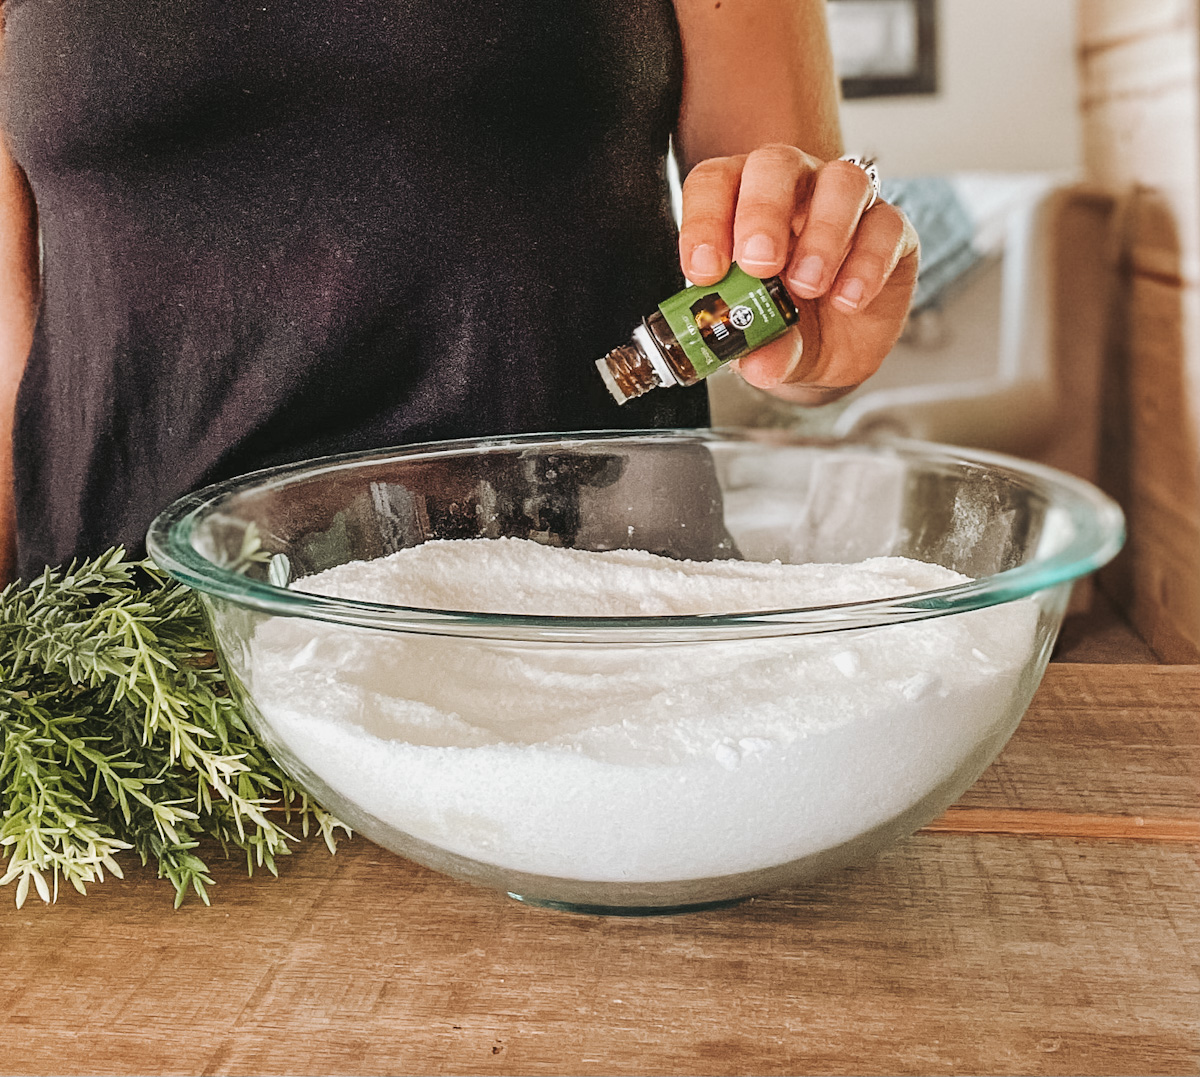 Lime essential oil being dropped into a large glass bowl filled with Epsom salt and baking soda